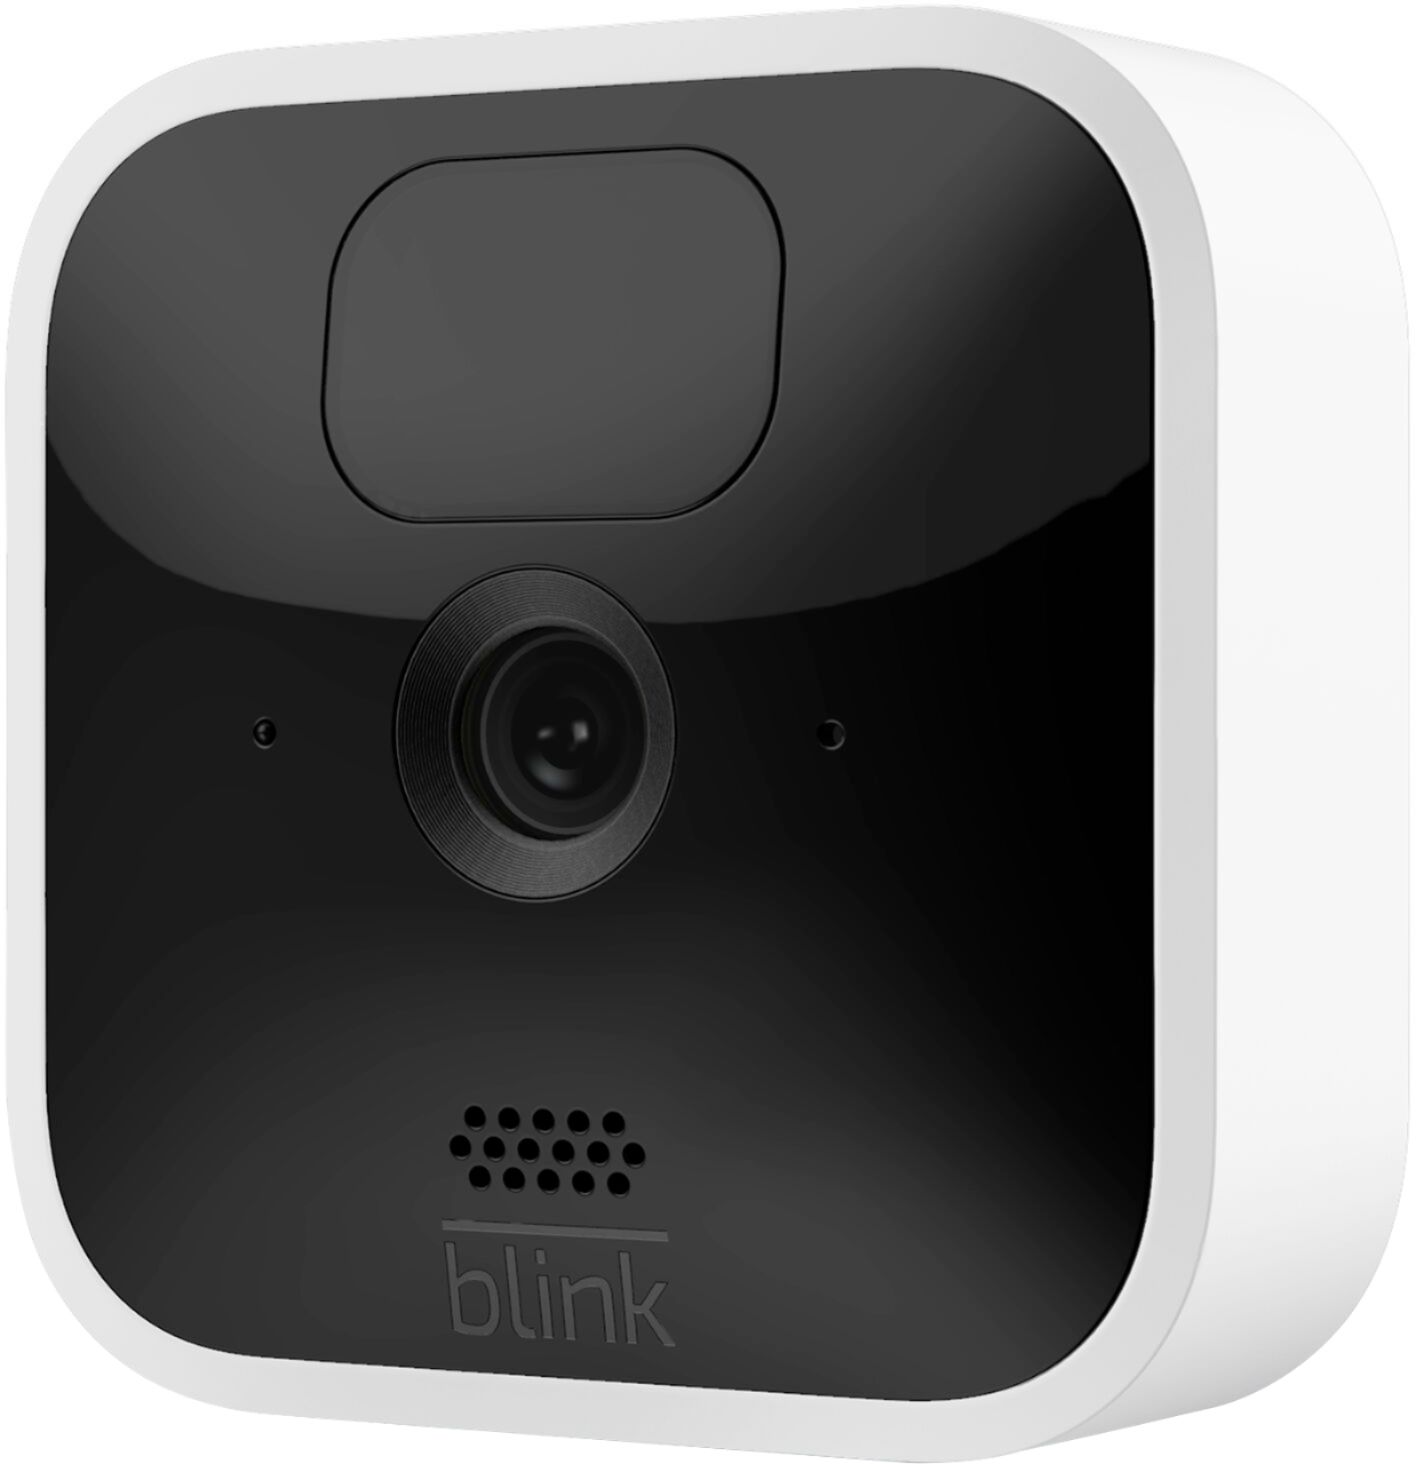 Blink - For two days only, Blink smart home security